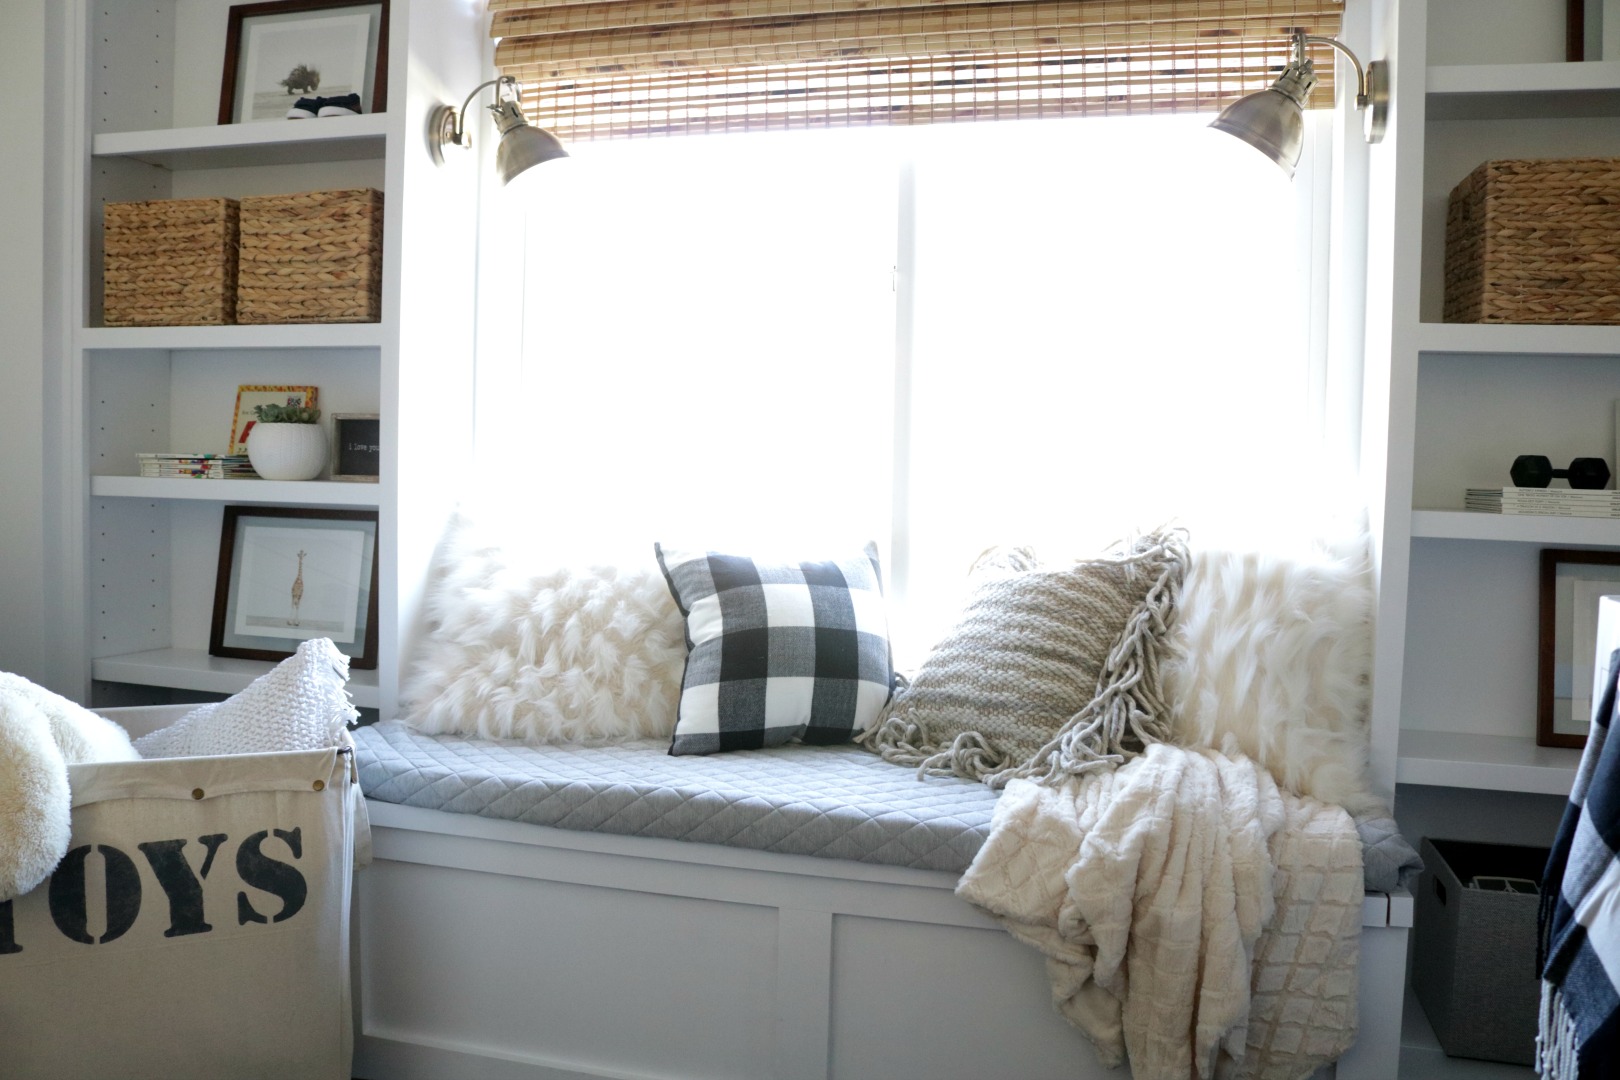 How To Build A Window Seat And Built In, Built In Bookcase Window Seat